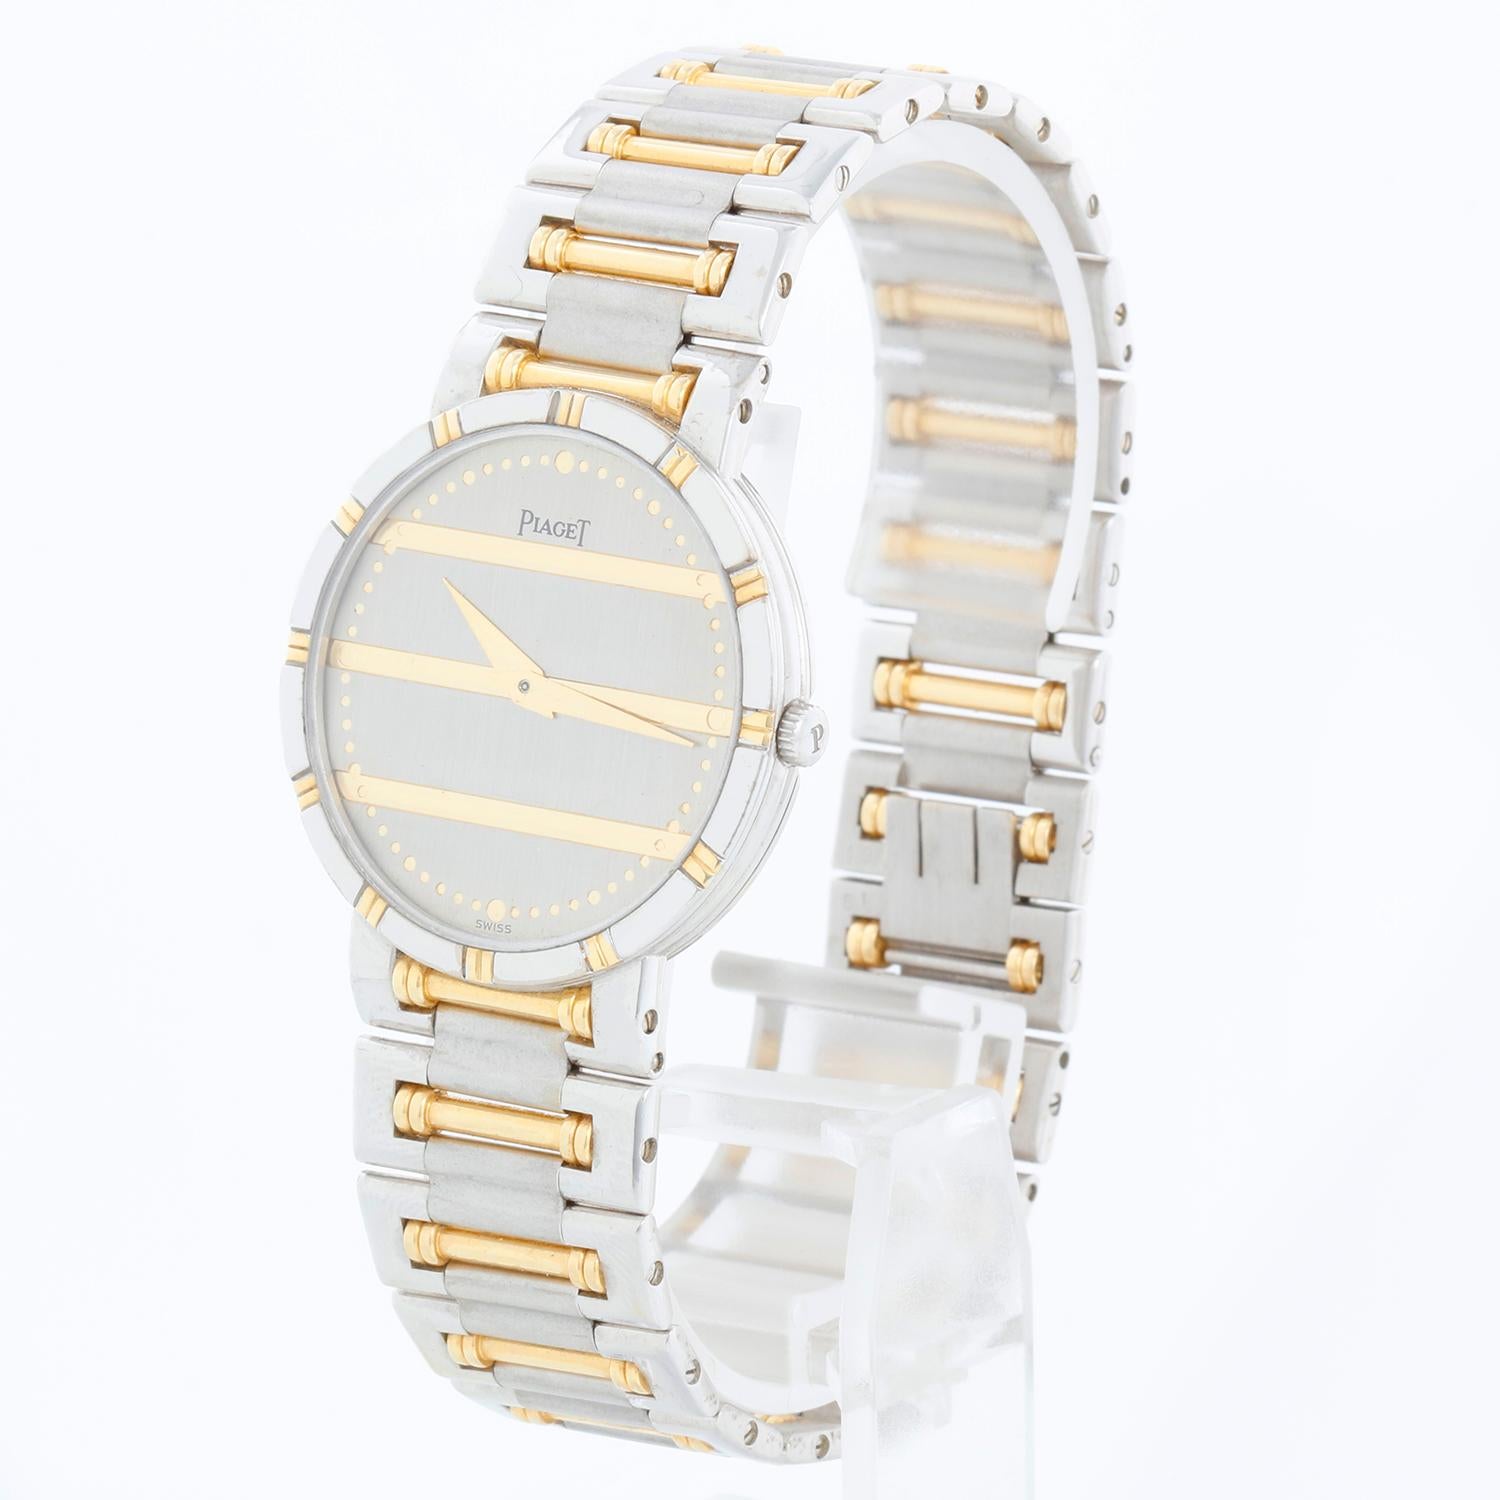 Piaget Dancer Men's 31mm 18k Yellow & White Gold Quartz Watch 84023 K81 - Quartz. 18k white gold case (31mm diameter). Silver dial with gold horizontal bars. 18k white gold bracelet with yellow gold links; will fit up to a 7.5 inch wrist. Pre-owned